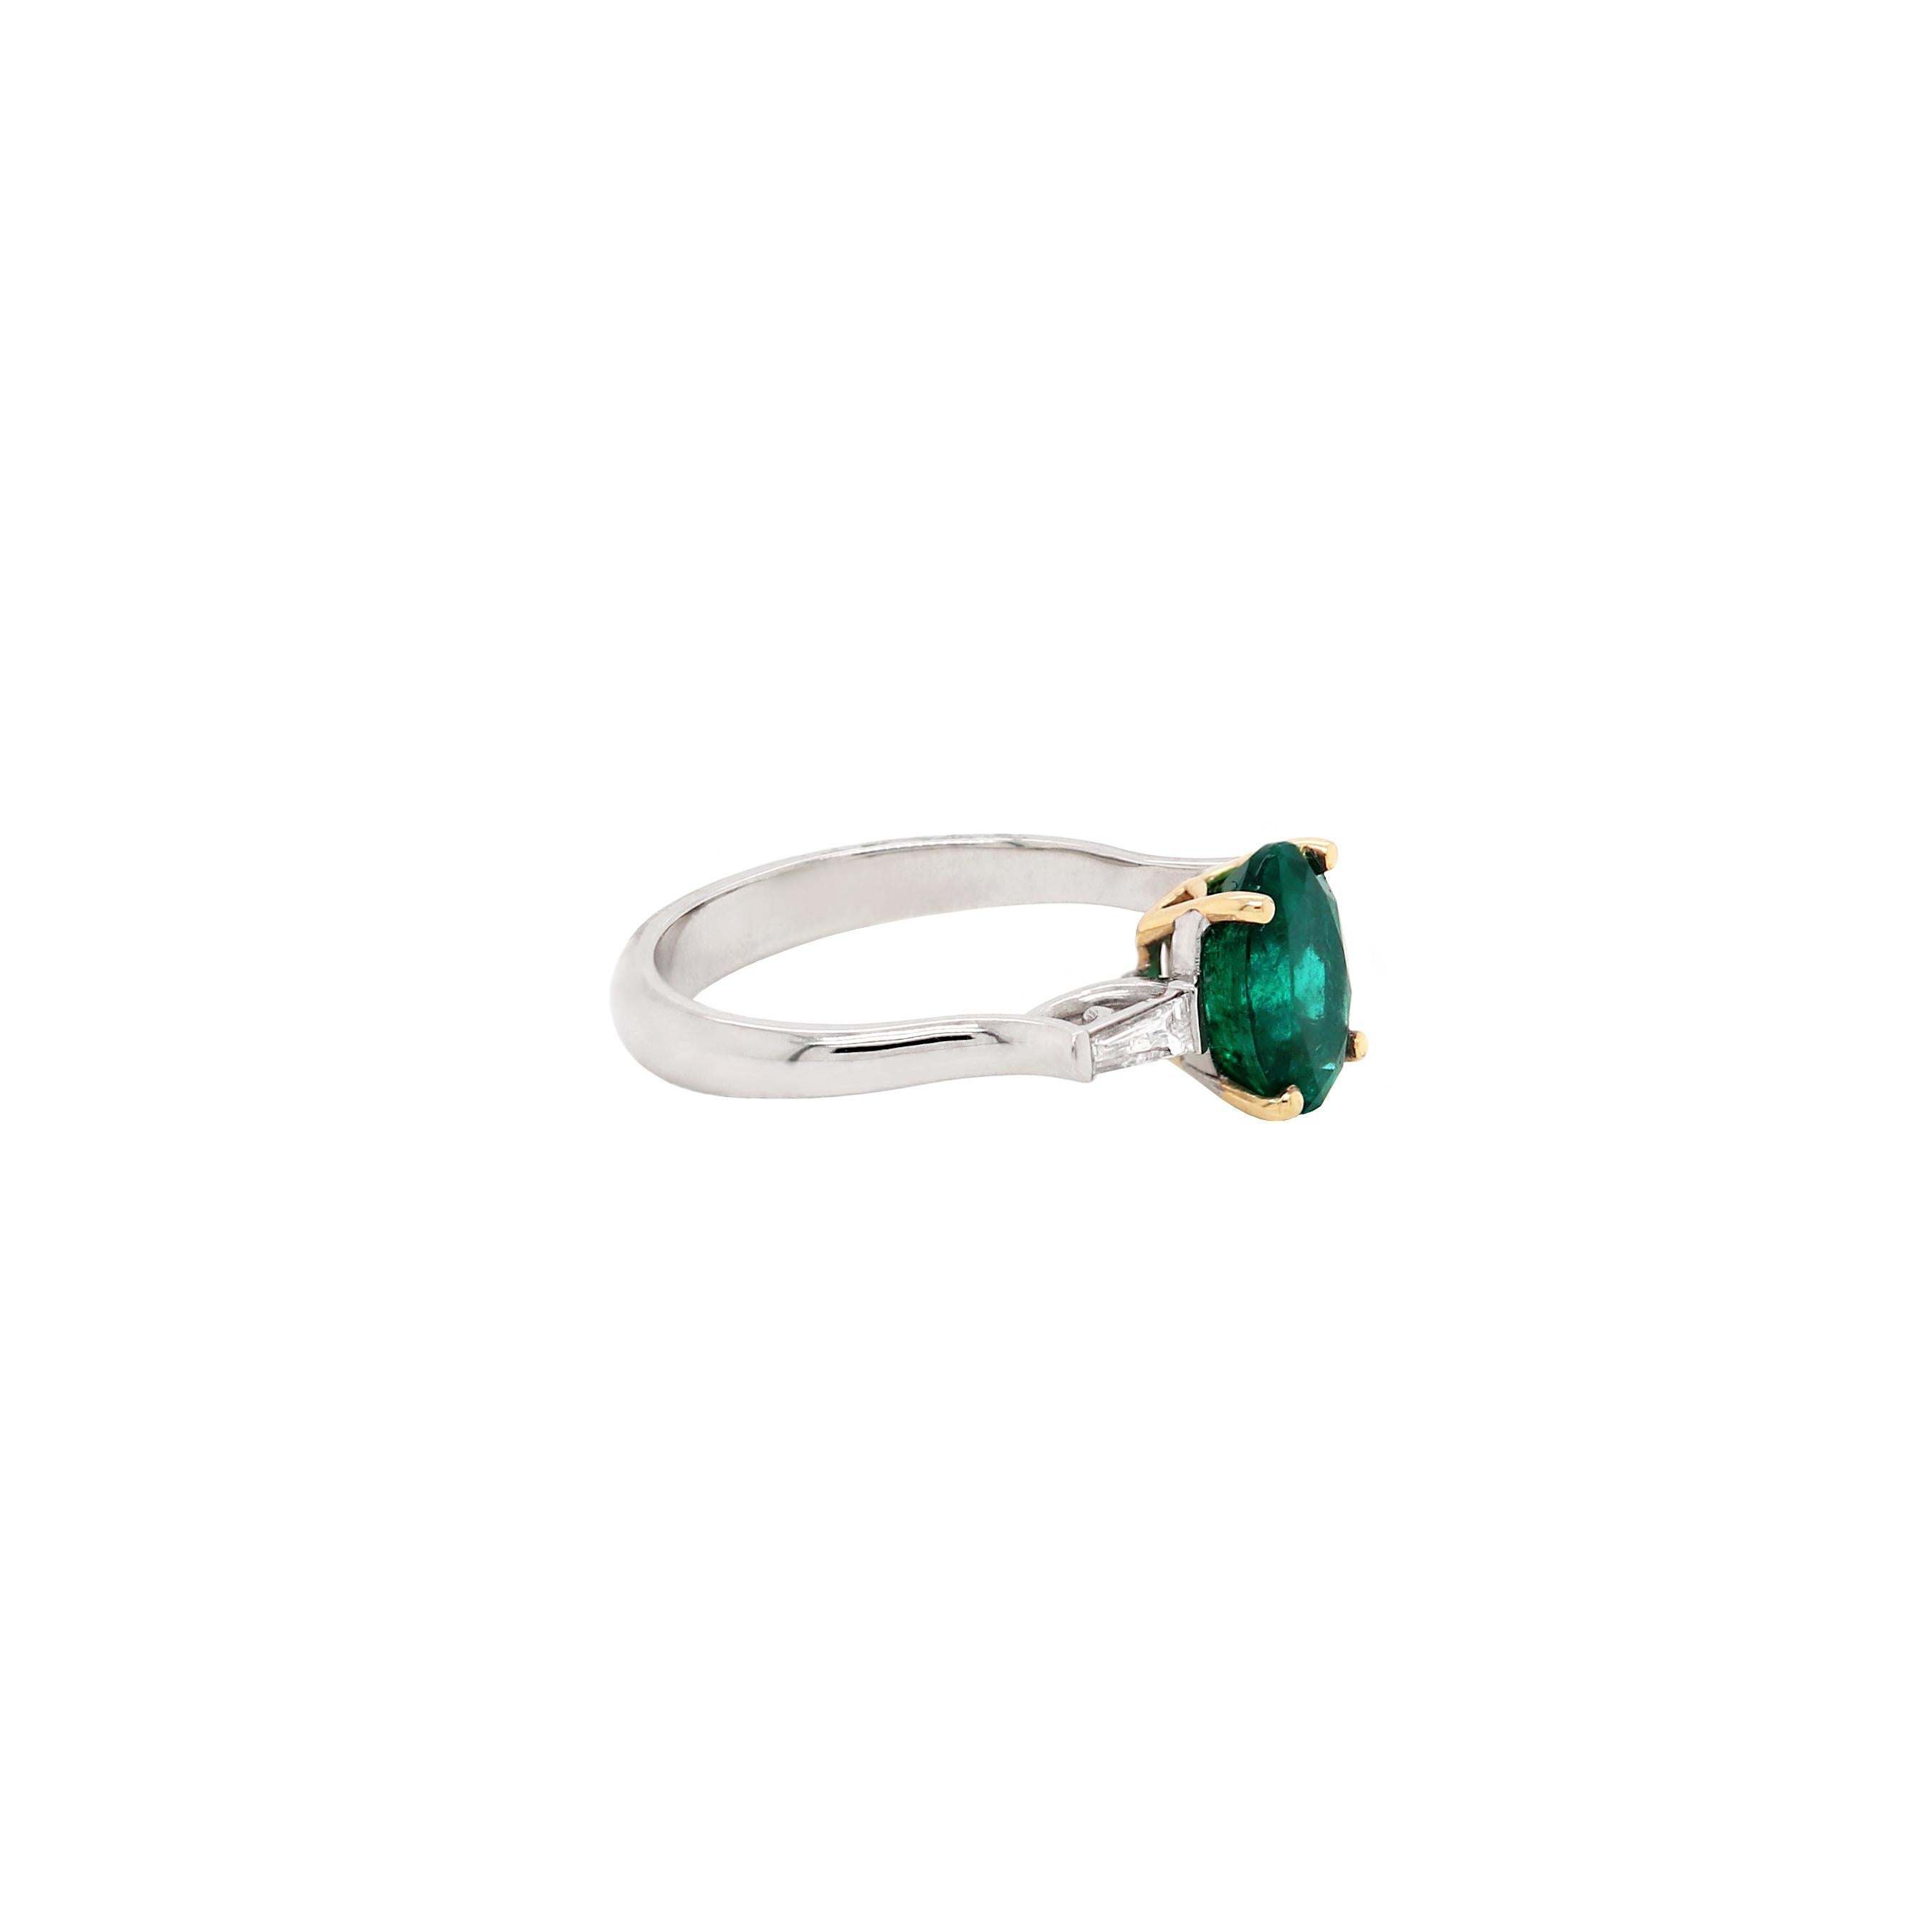 This ring features a natural oval shaped emerald weighing 1.77ct in an 18 carat yellow gold four claw, open back setting. The beautiful emerald is accompanied by a fine quality tapered baguette diamond on either side with a total diamond weight of